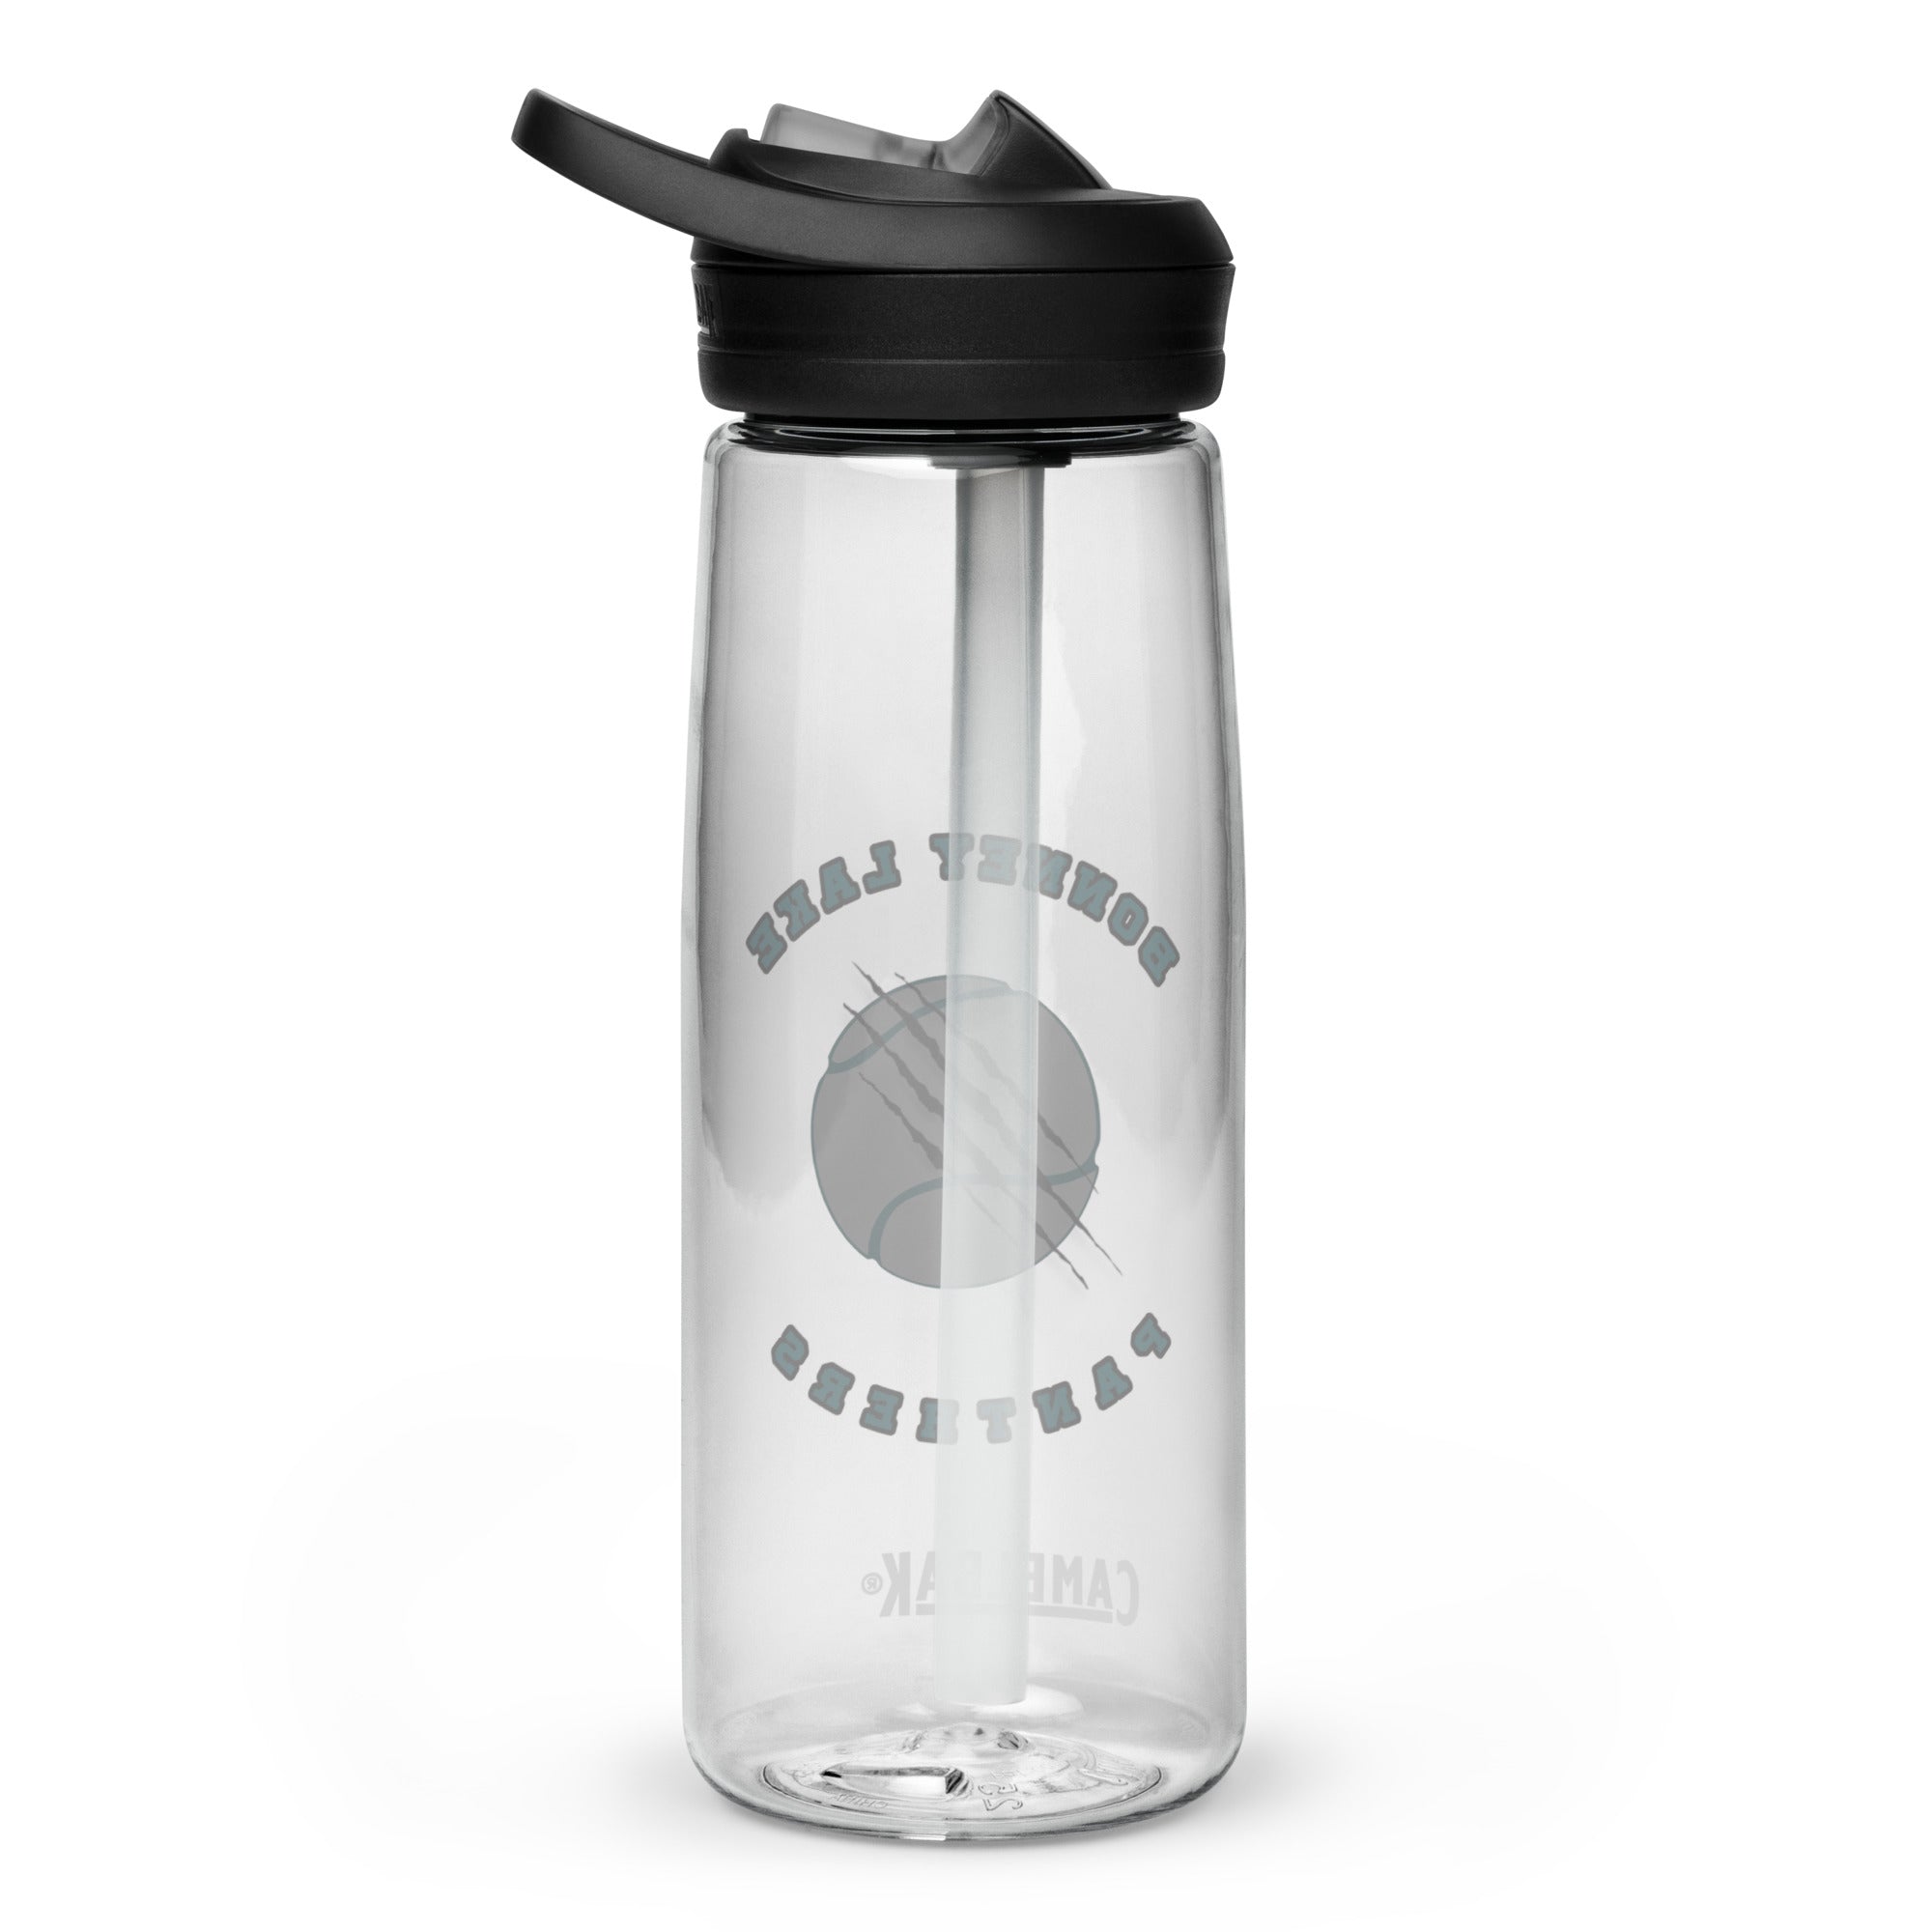 BLHT Sports water bottle